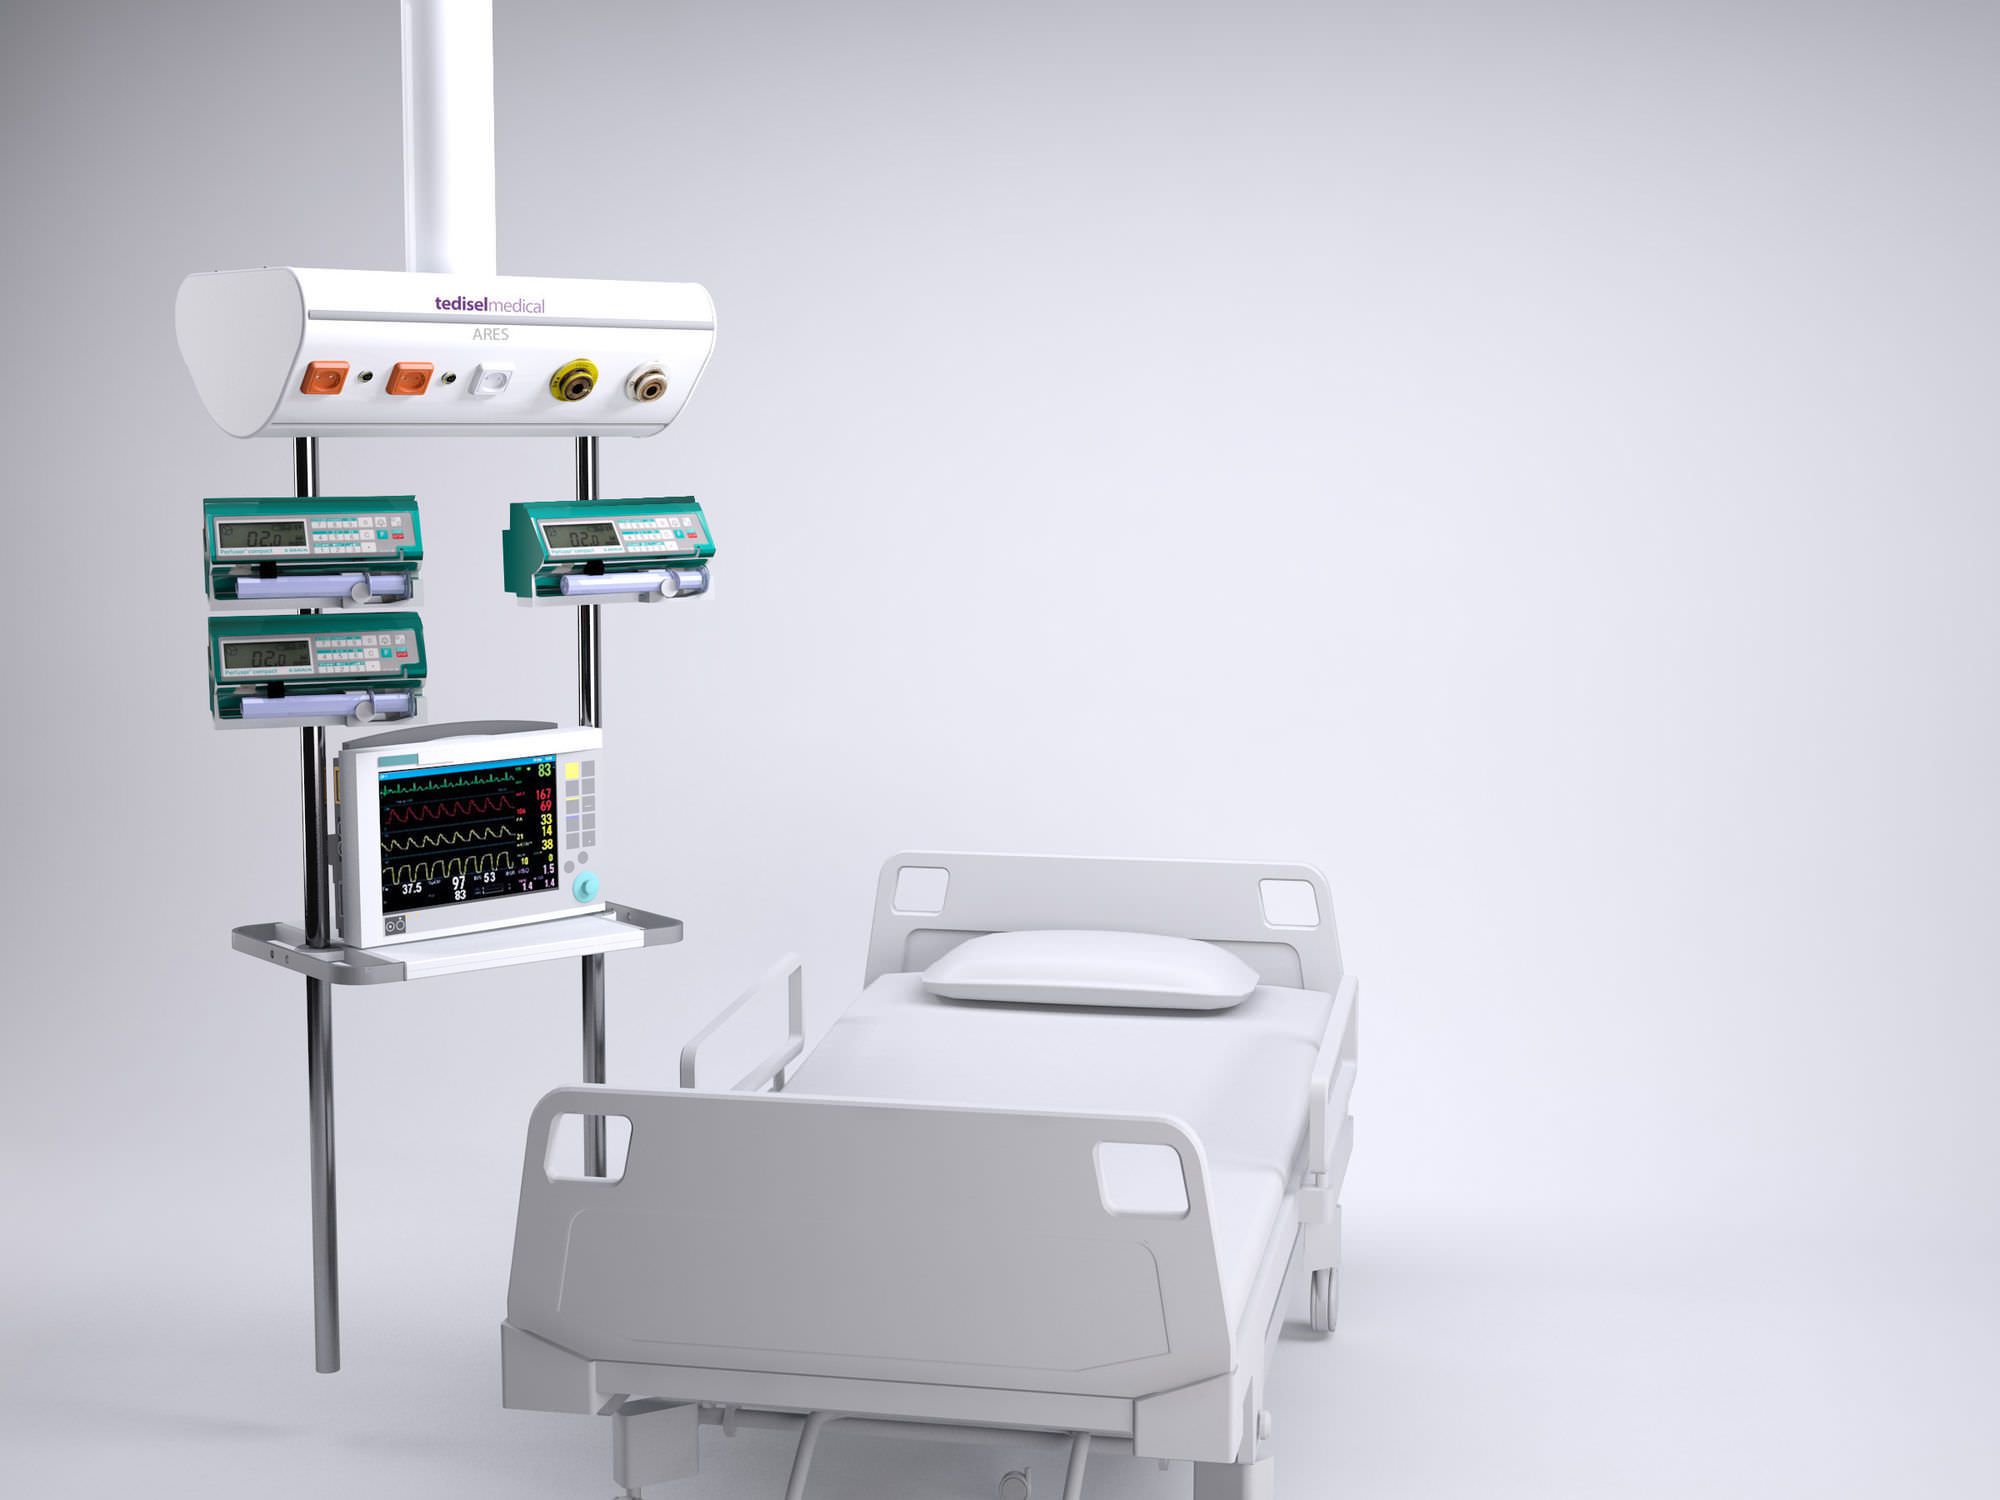 Ceiling-mounted medical pendant / articulated / single-arm / intensive care ARES Tedisel Medical